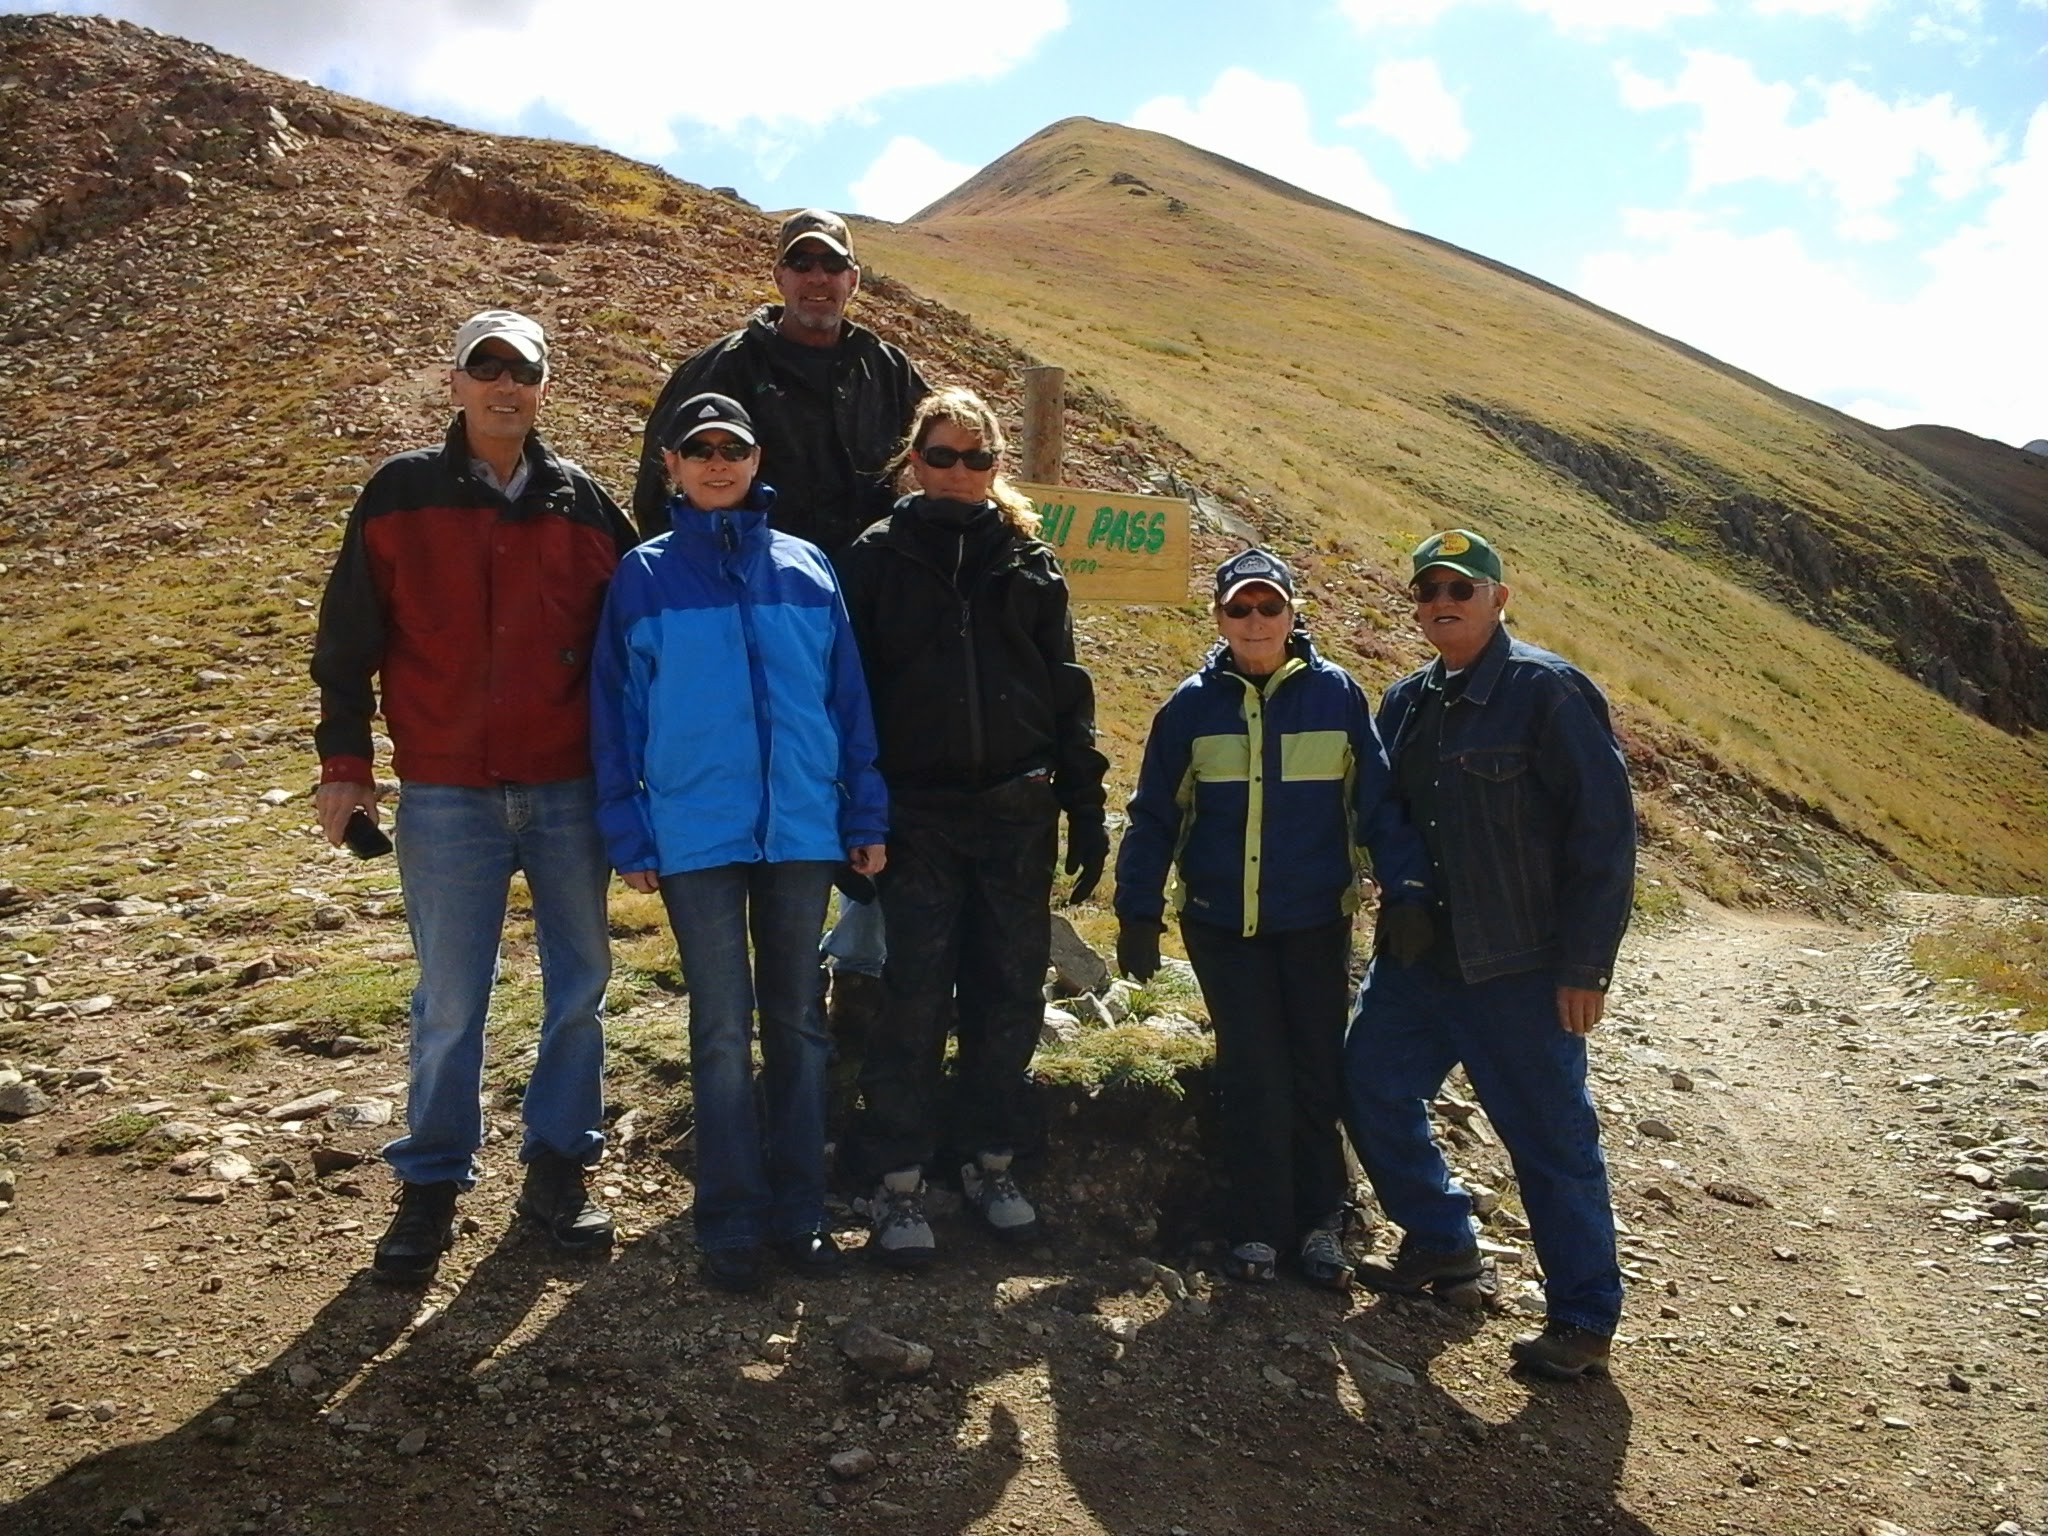 Seven people standing on the mountain road with fall colors all around.